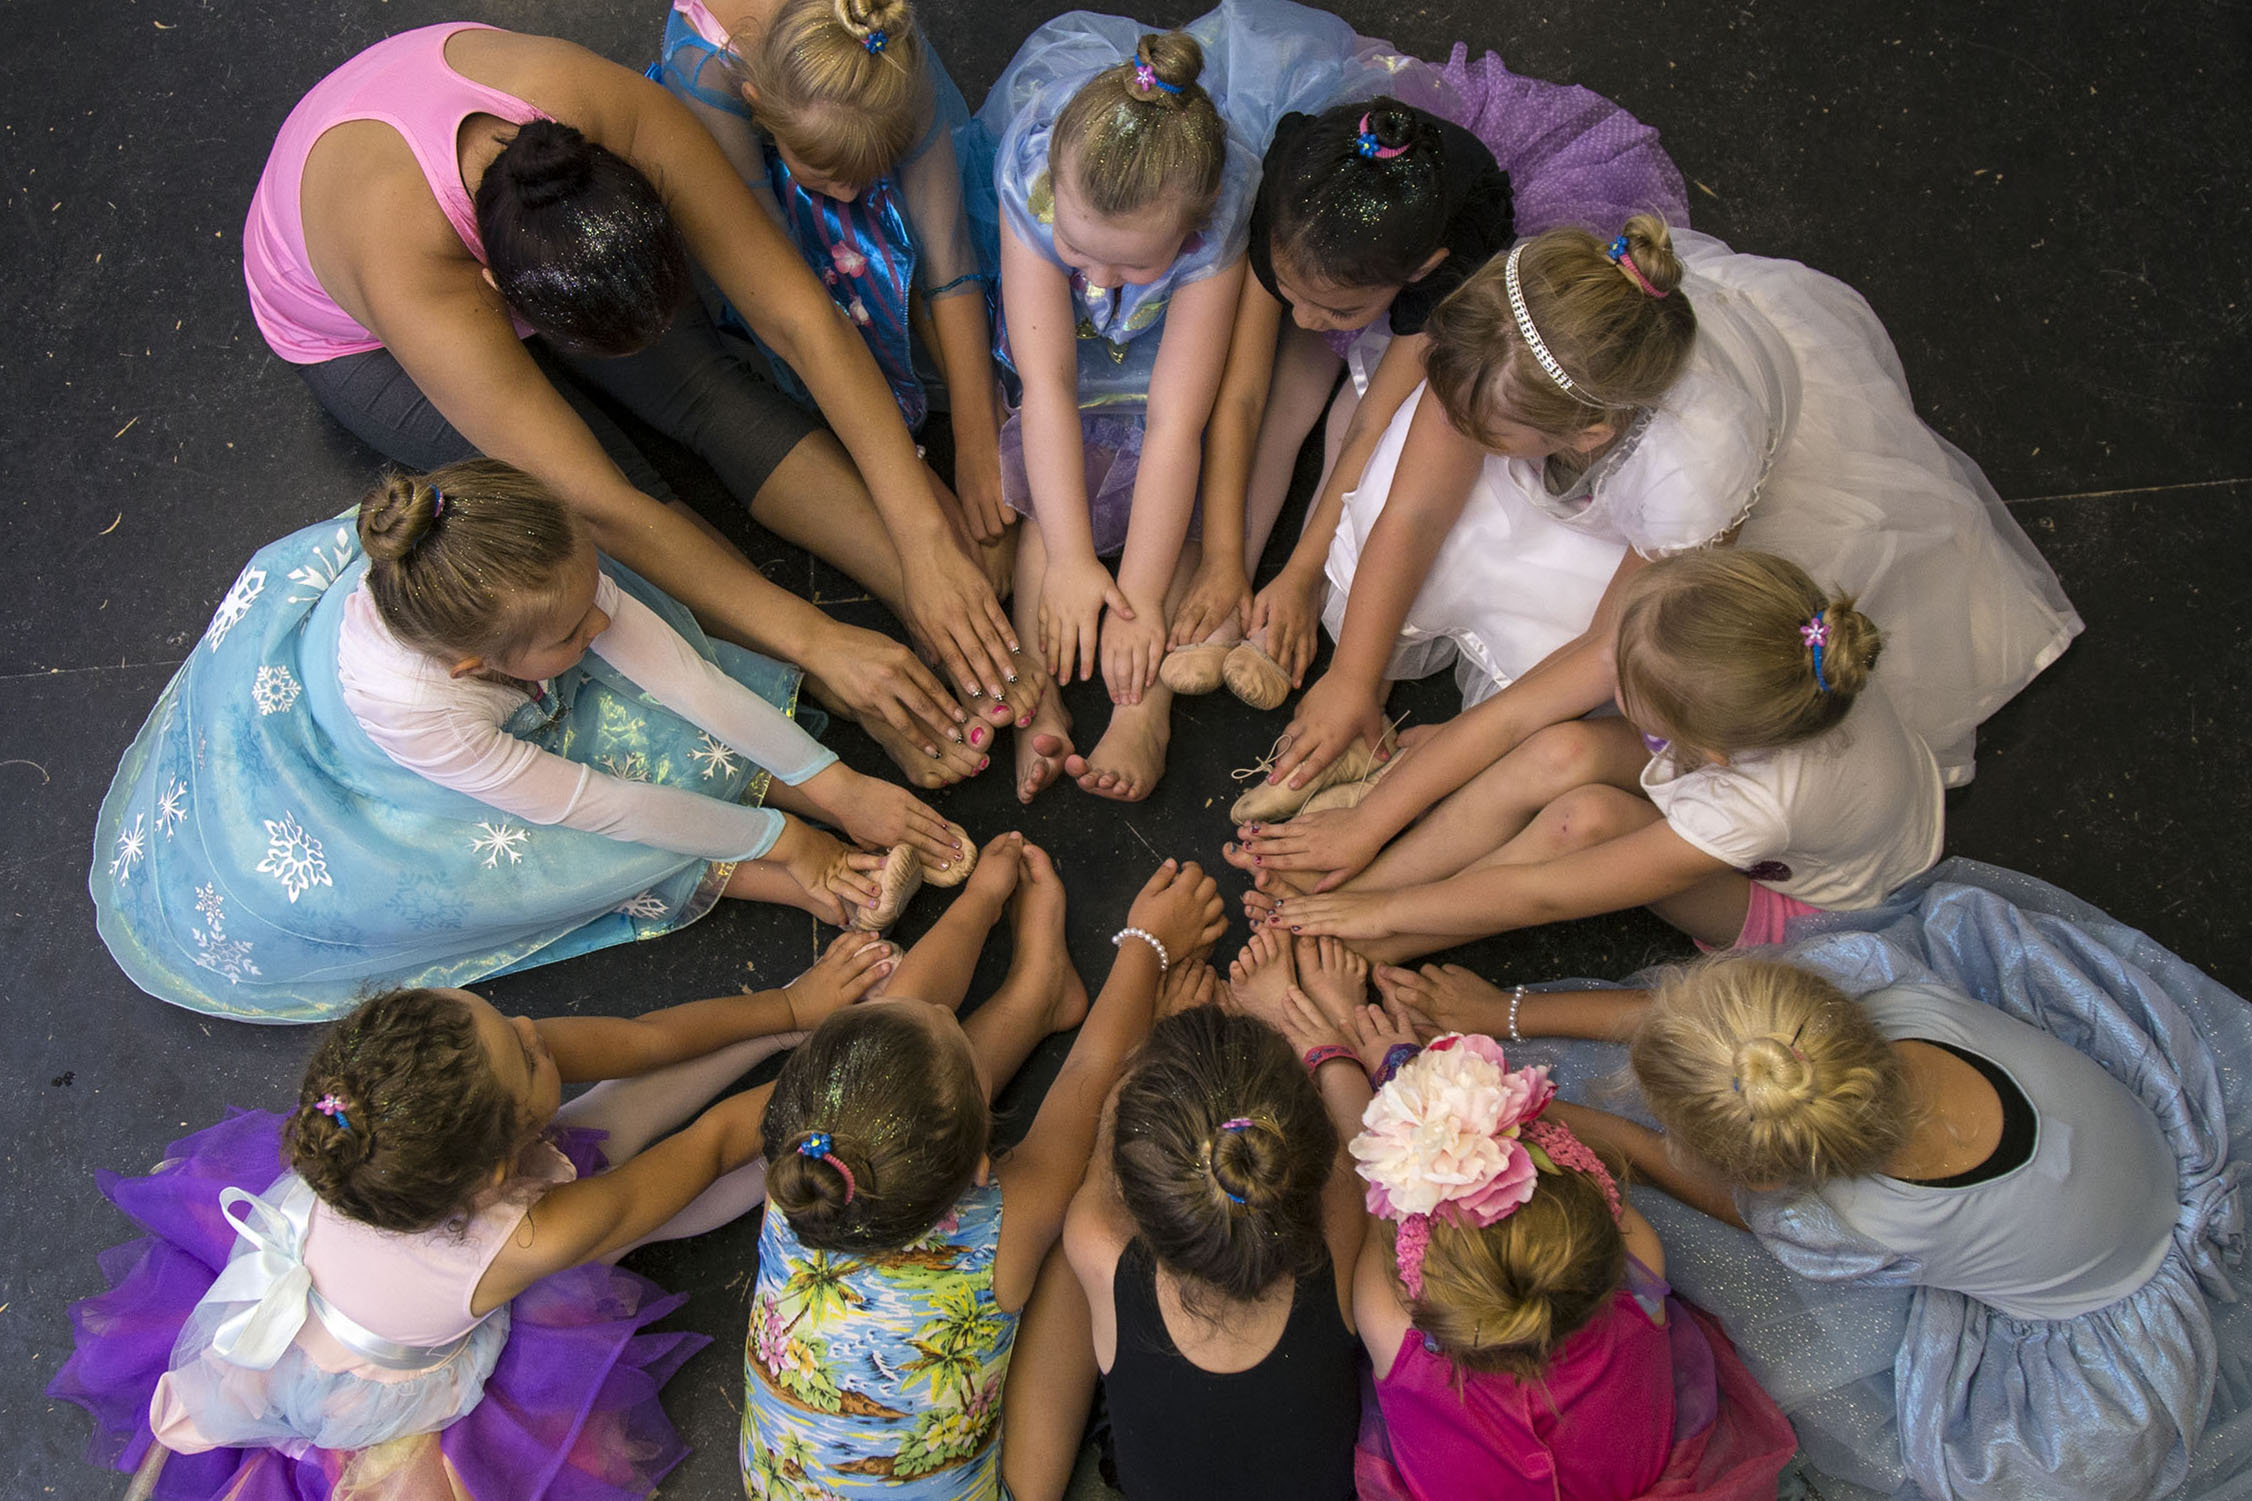  EUGENE, OR. Young girls attend Fairy Princess Dance Camp during their summer break. 